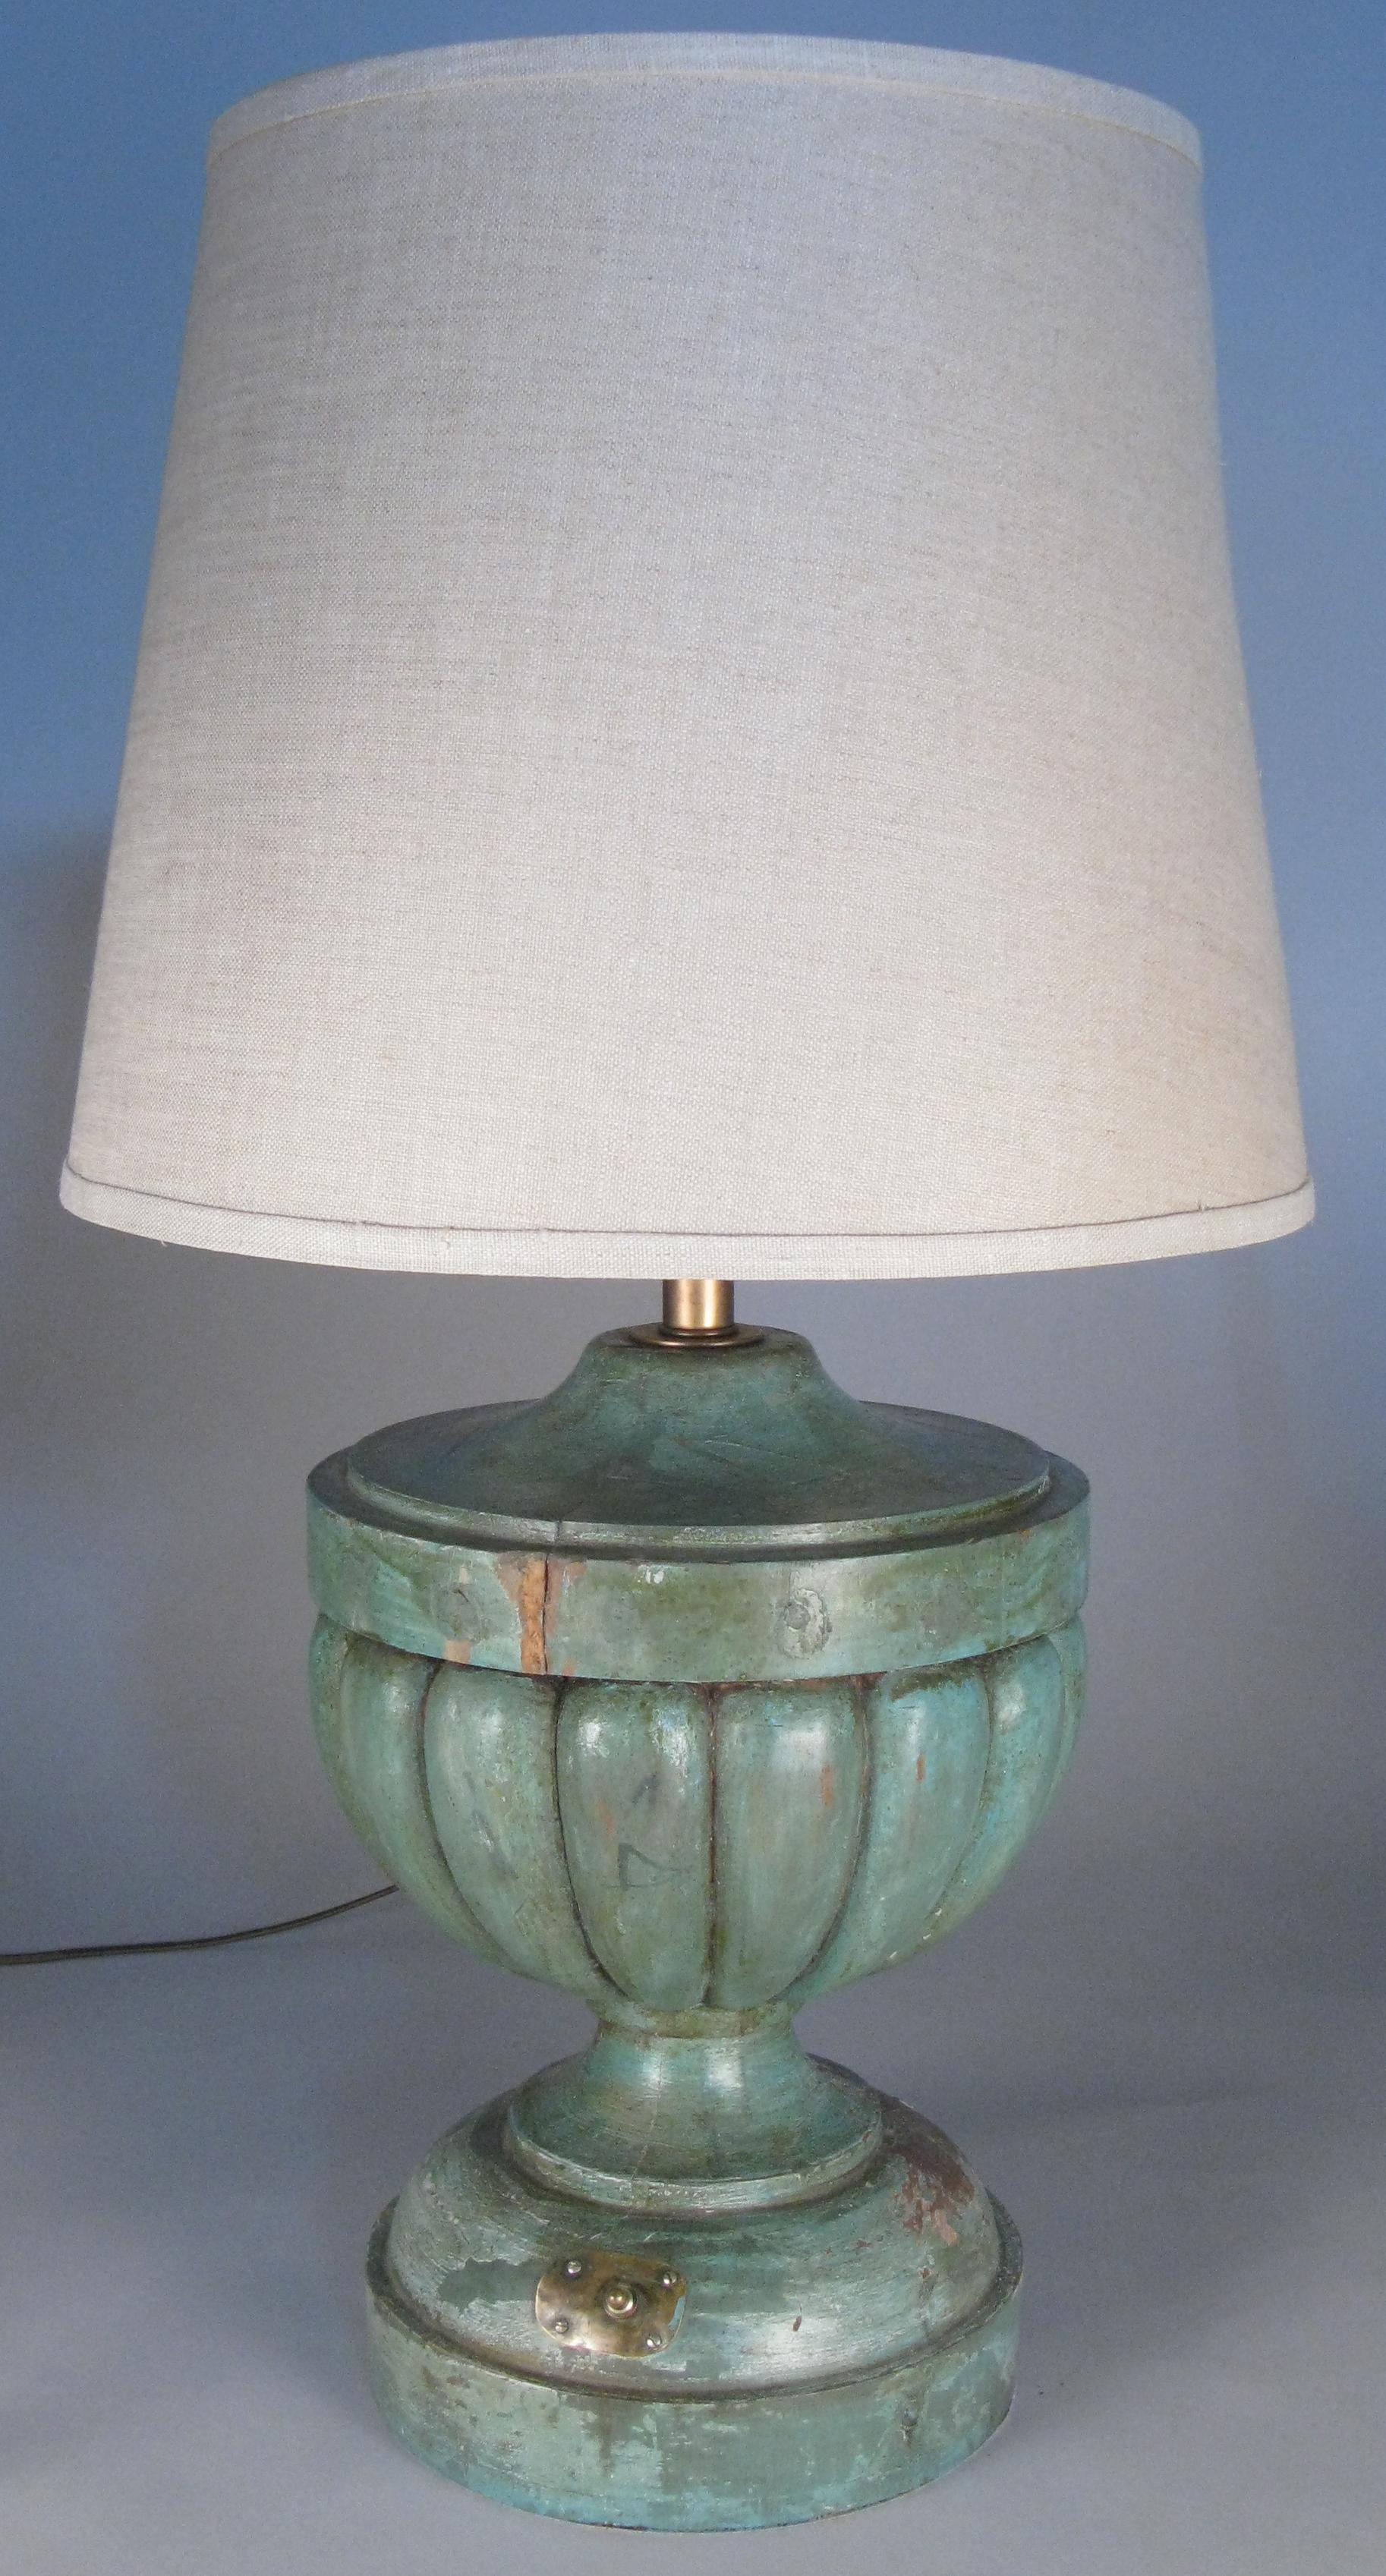 a beautiful pair of antique 1940s table lamps with painted wood bases in a carved urn shape. the bases have the remains of the original hunter green painted finish. completely rewired with double sockets with brass pull chains. the original brass